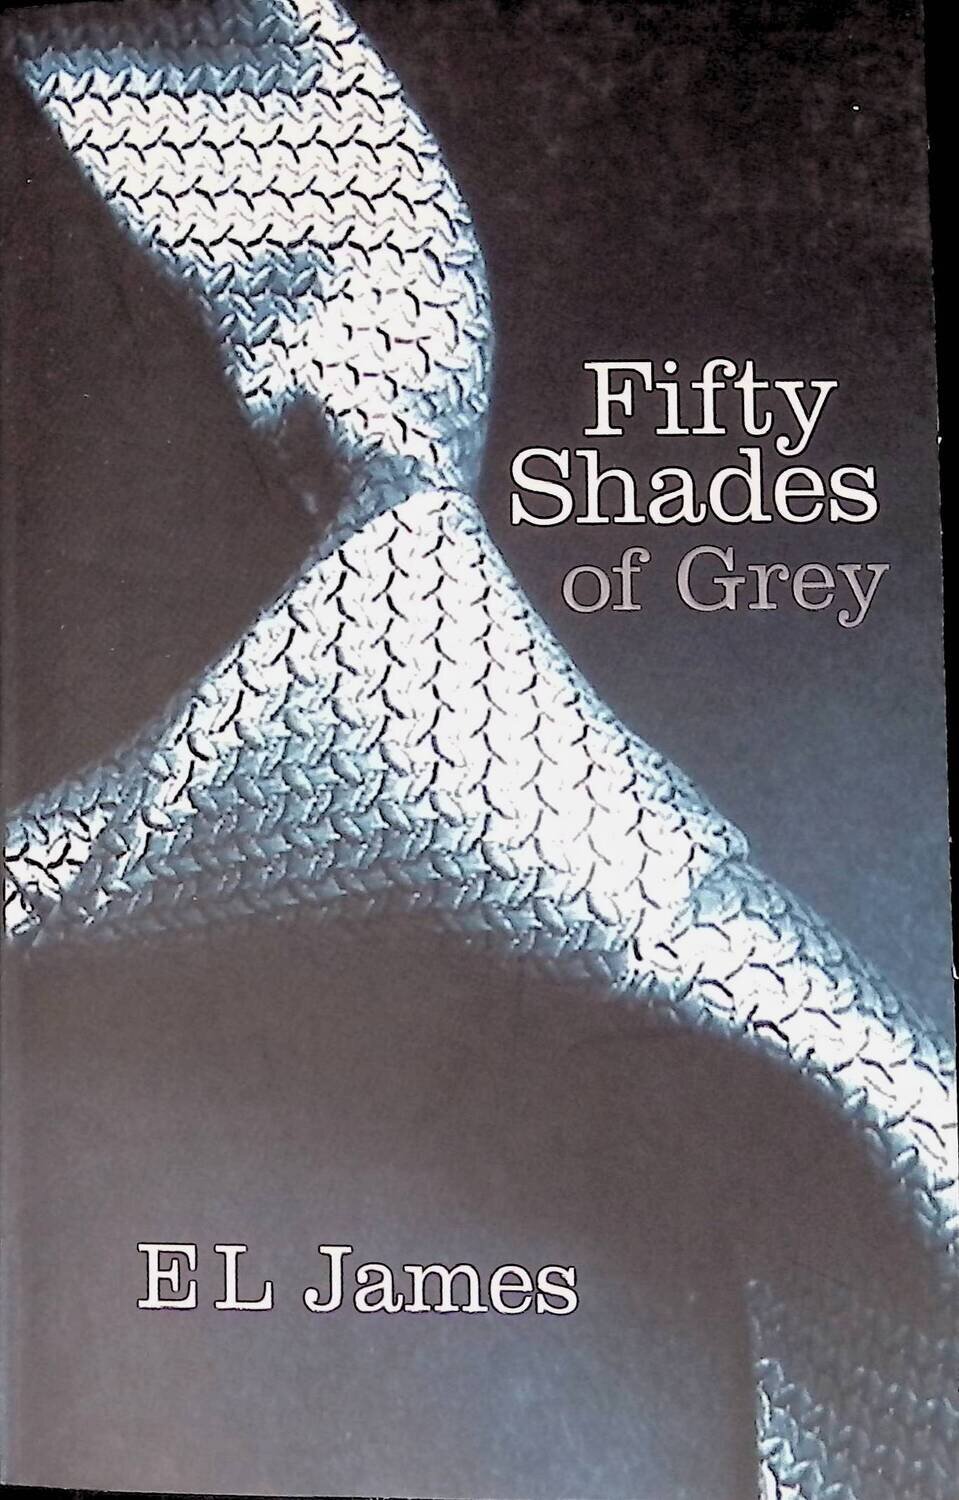 Fifty Shades of Grey; James E. L.